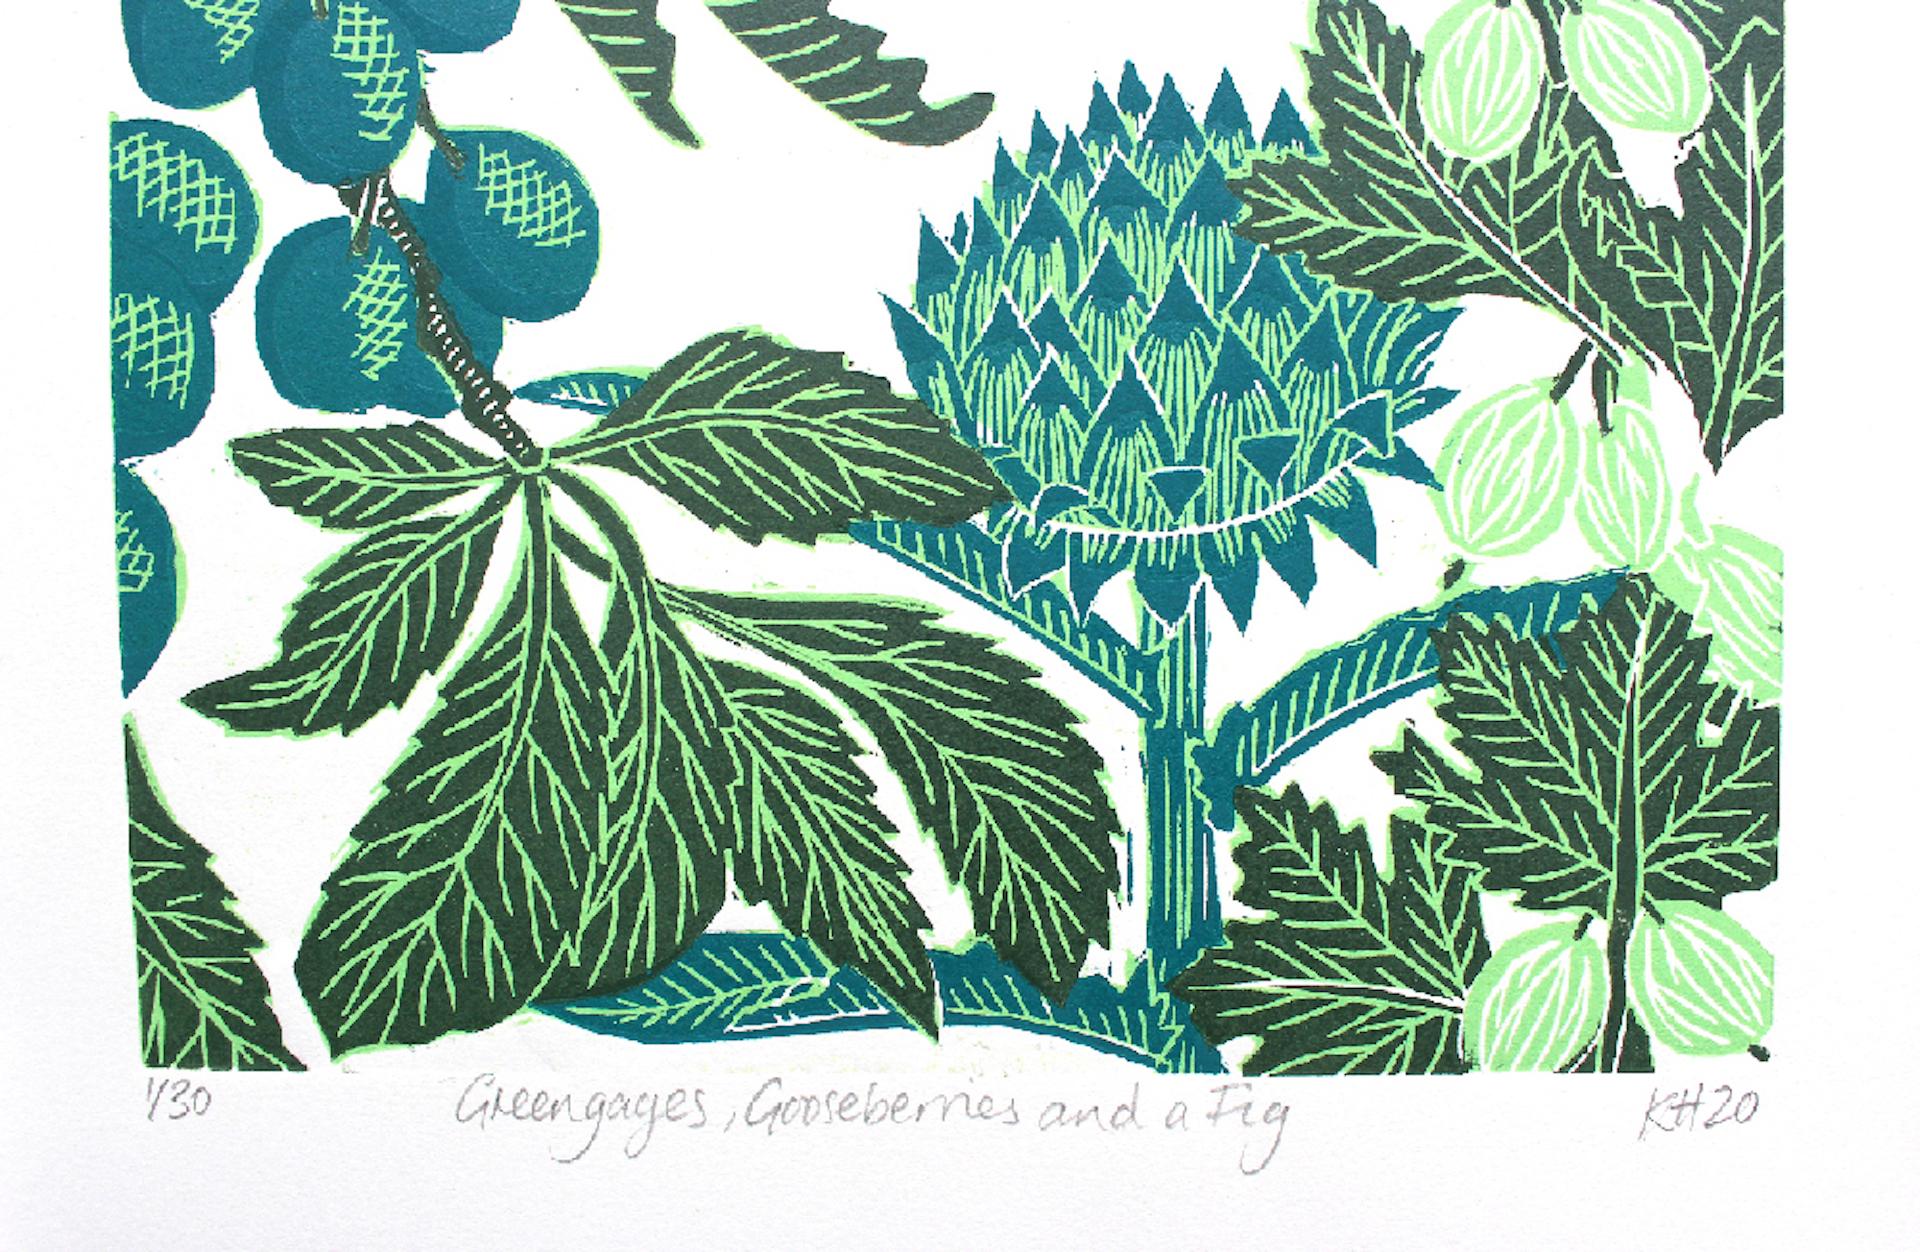 Kate Heiss, Greengages, Gooseberries and a Fig, Limited Edition Linocut Print 3